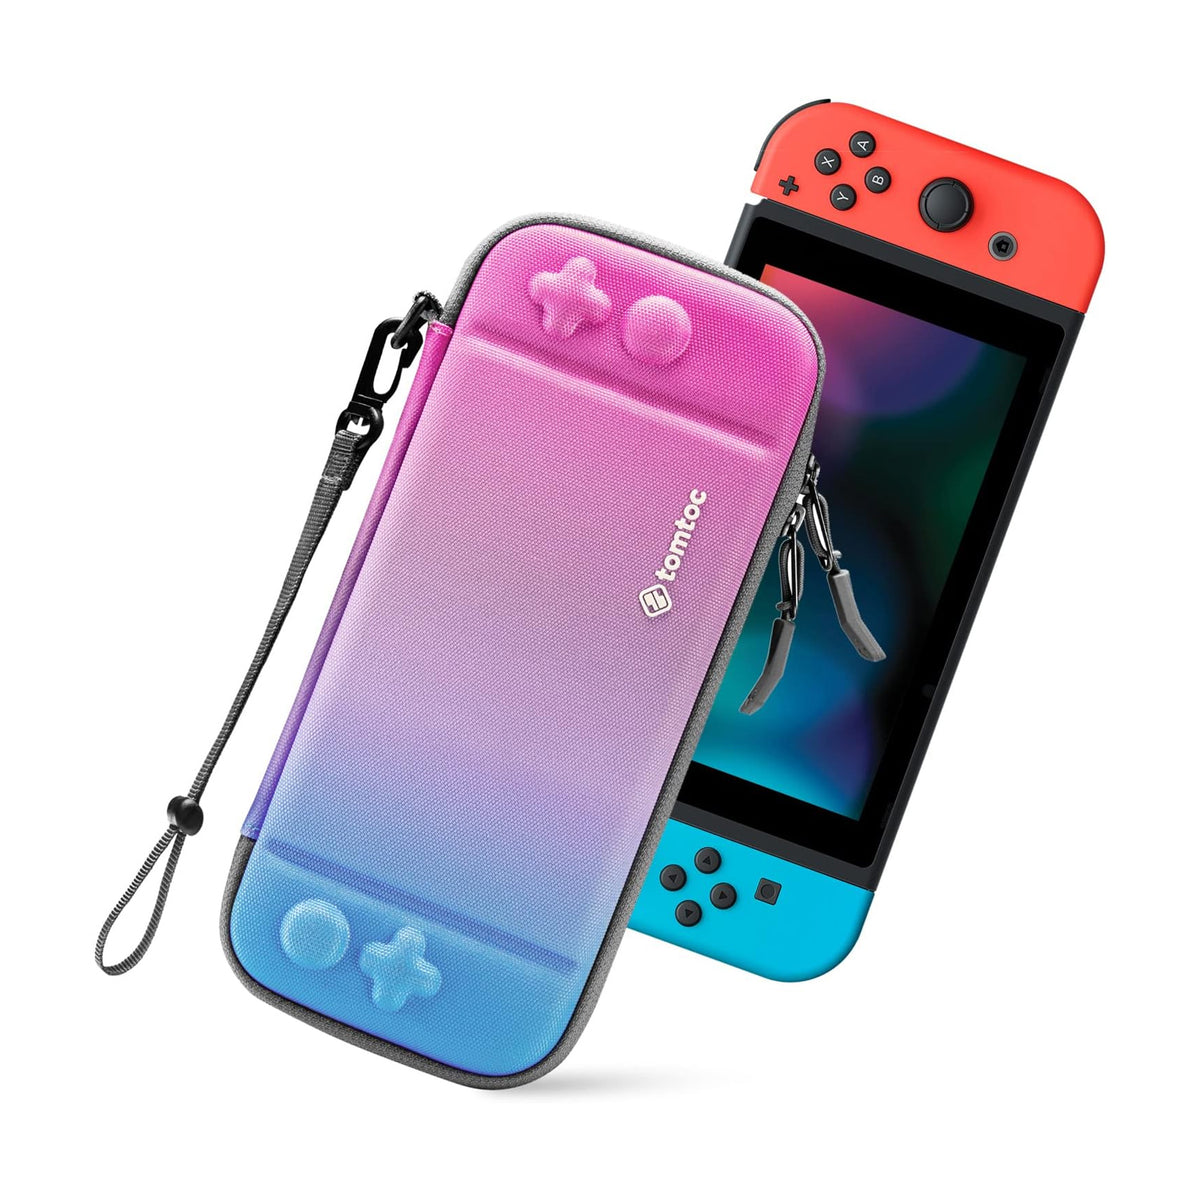 Tomtoc FancyCase A05 NS Slim Case for Nintendo Switch